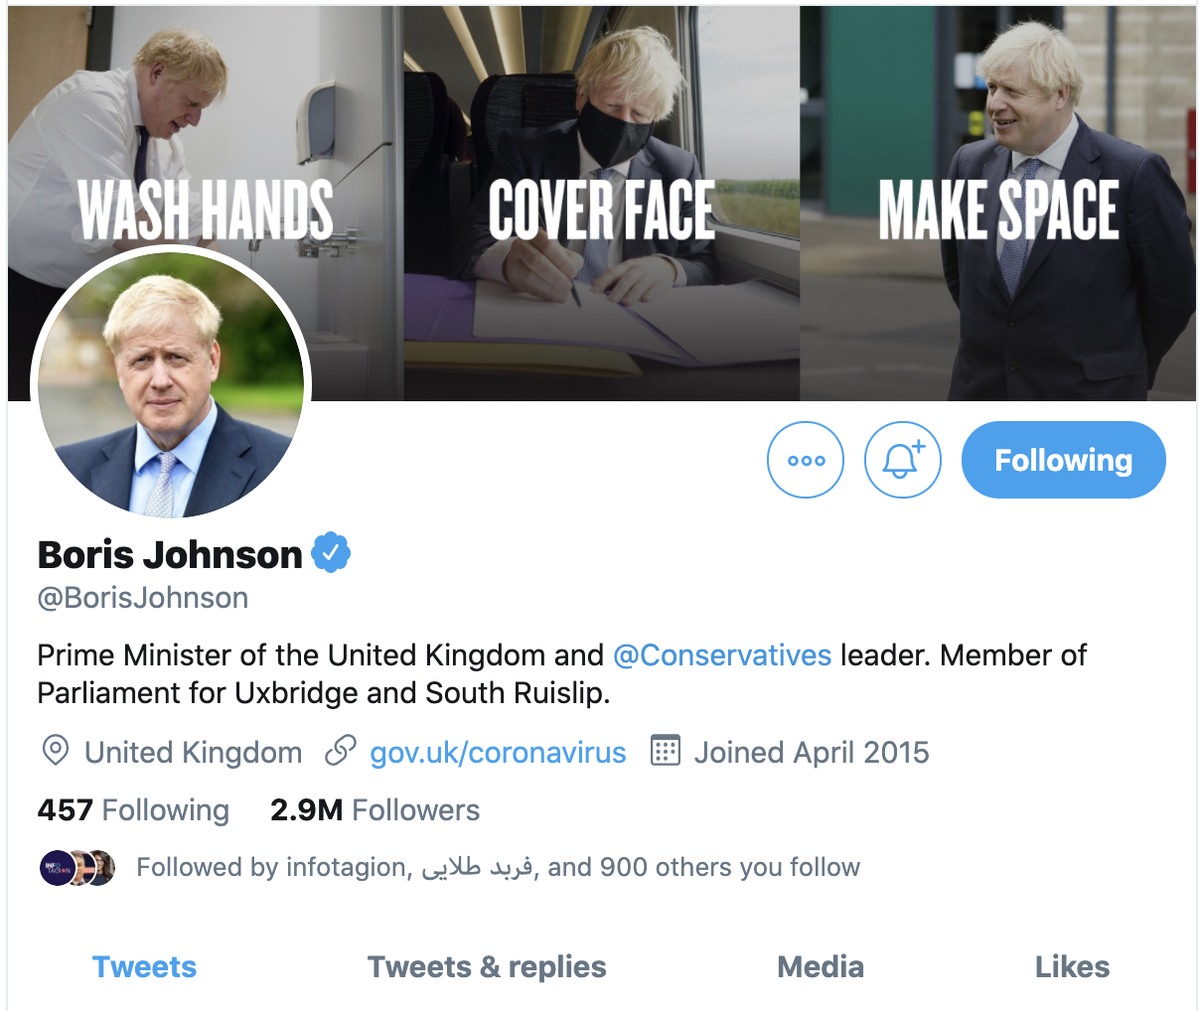 The exact same labelling system has been applied to UK government accounts.  @10DowningStreet has been labelled, but  @BorisJohnson has not. Foreign Secretary  @DominicRaab has also been labelled